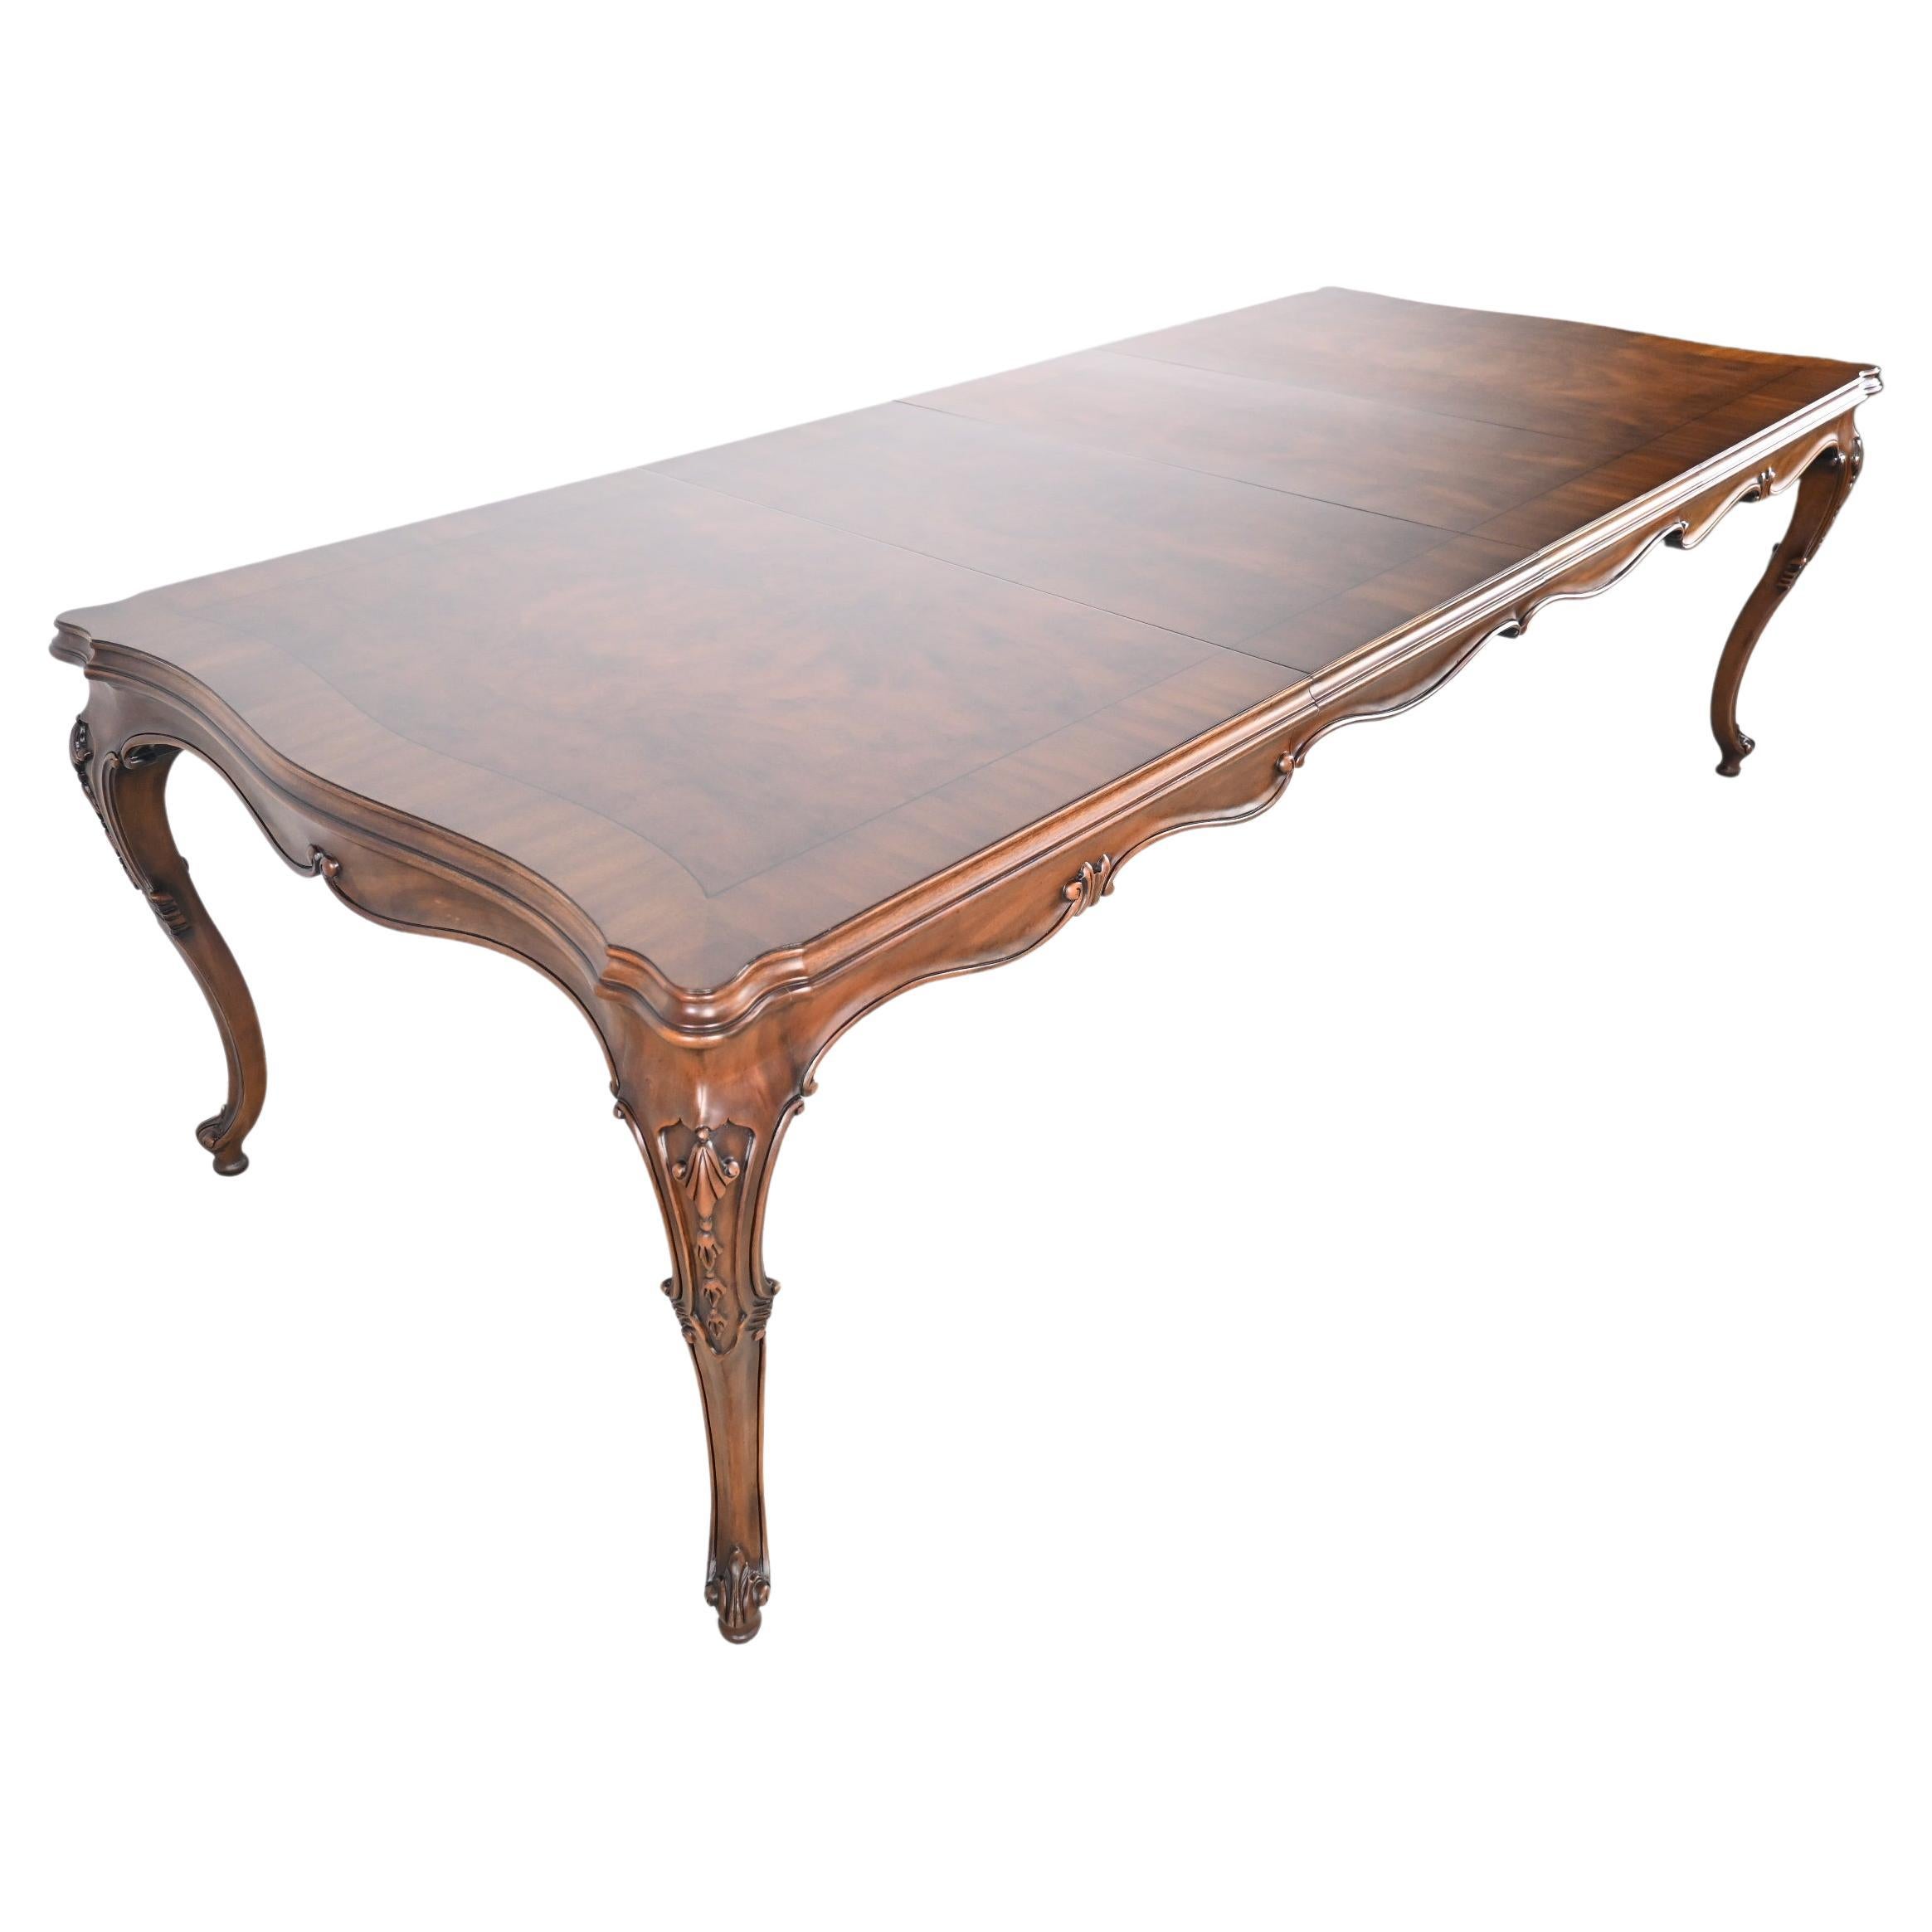 Karges Furniture Louis XV French Provincial Style Extension Dining Table